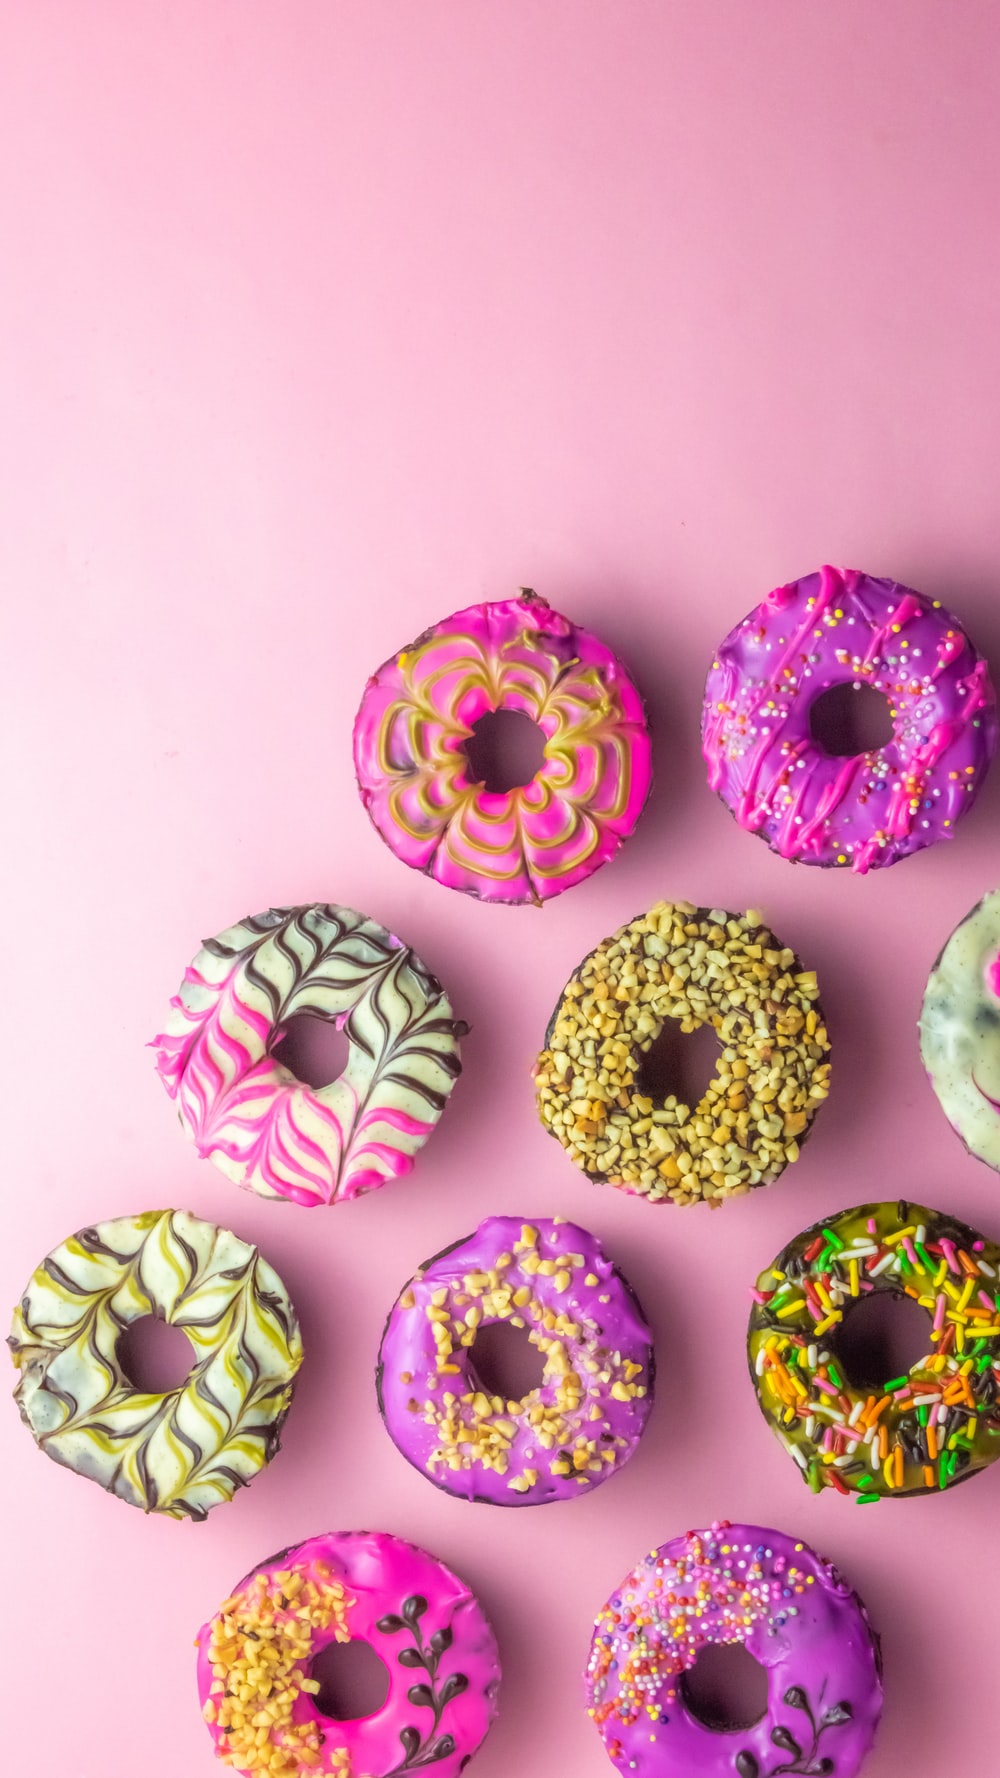 Pink Donut Picture. Download Free Image